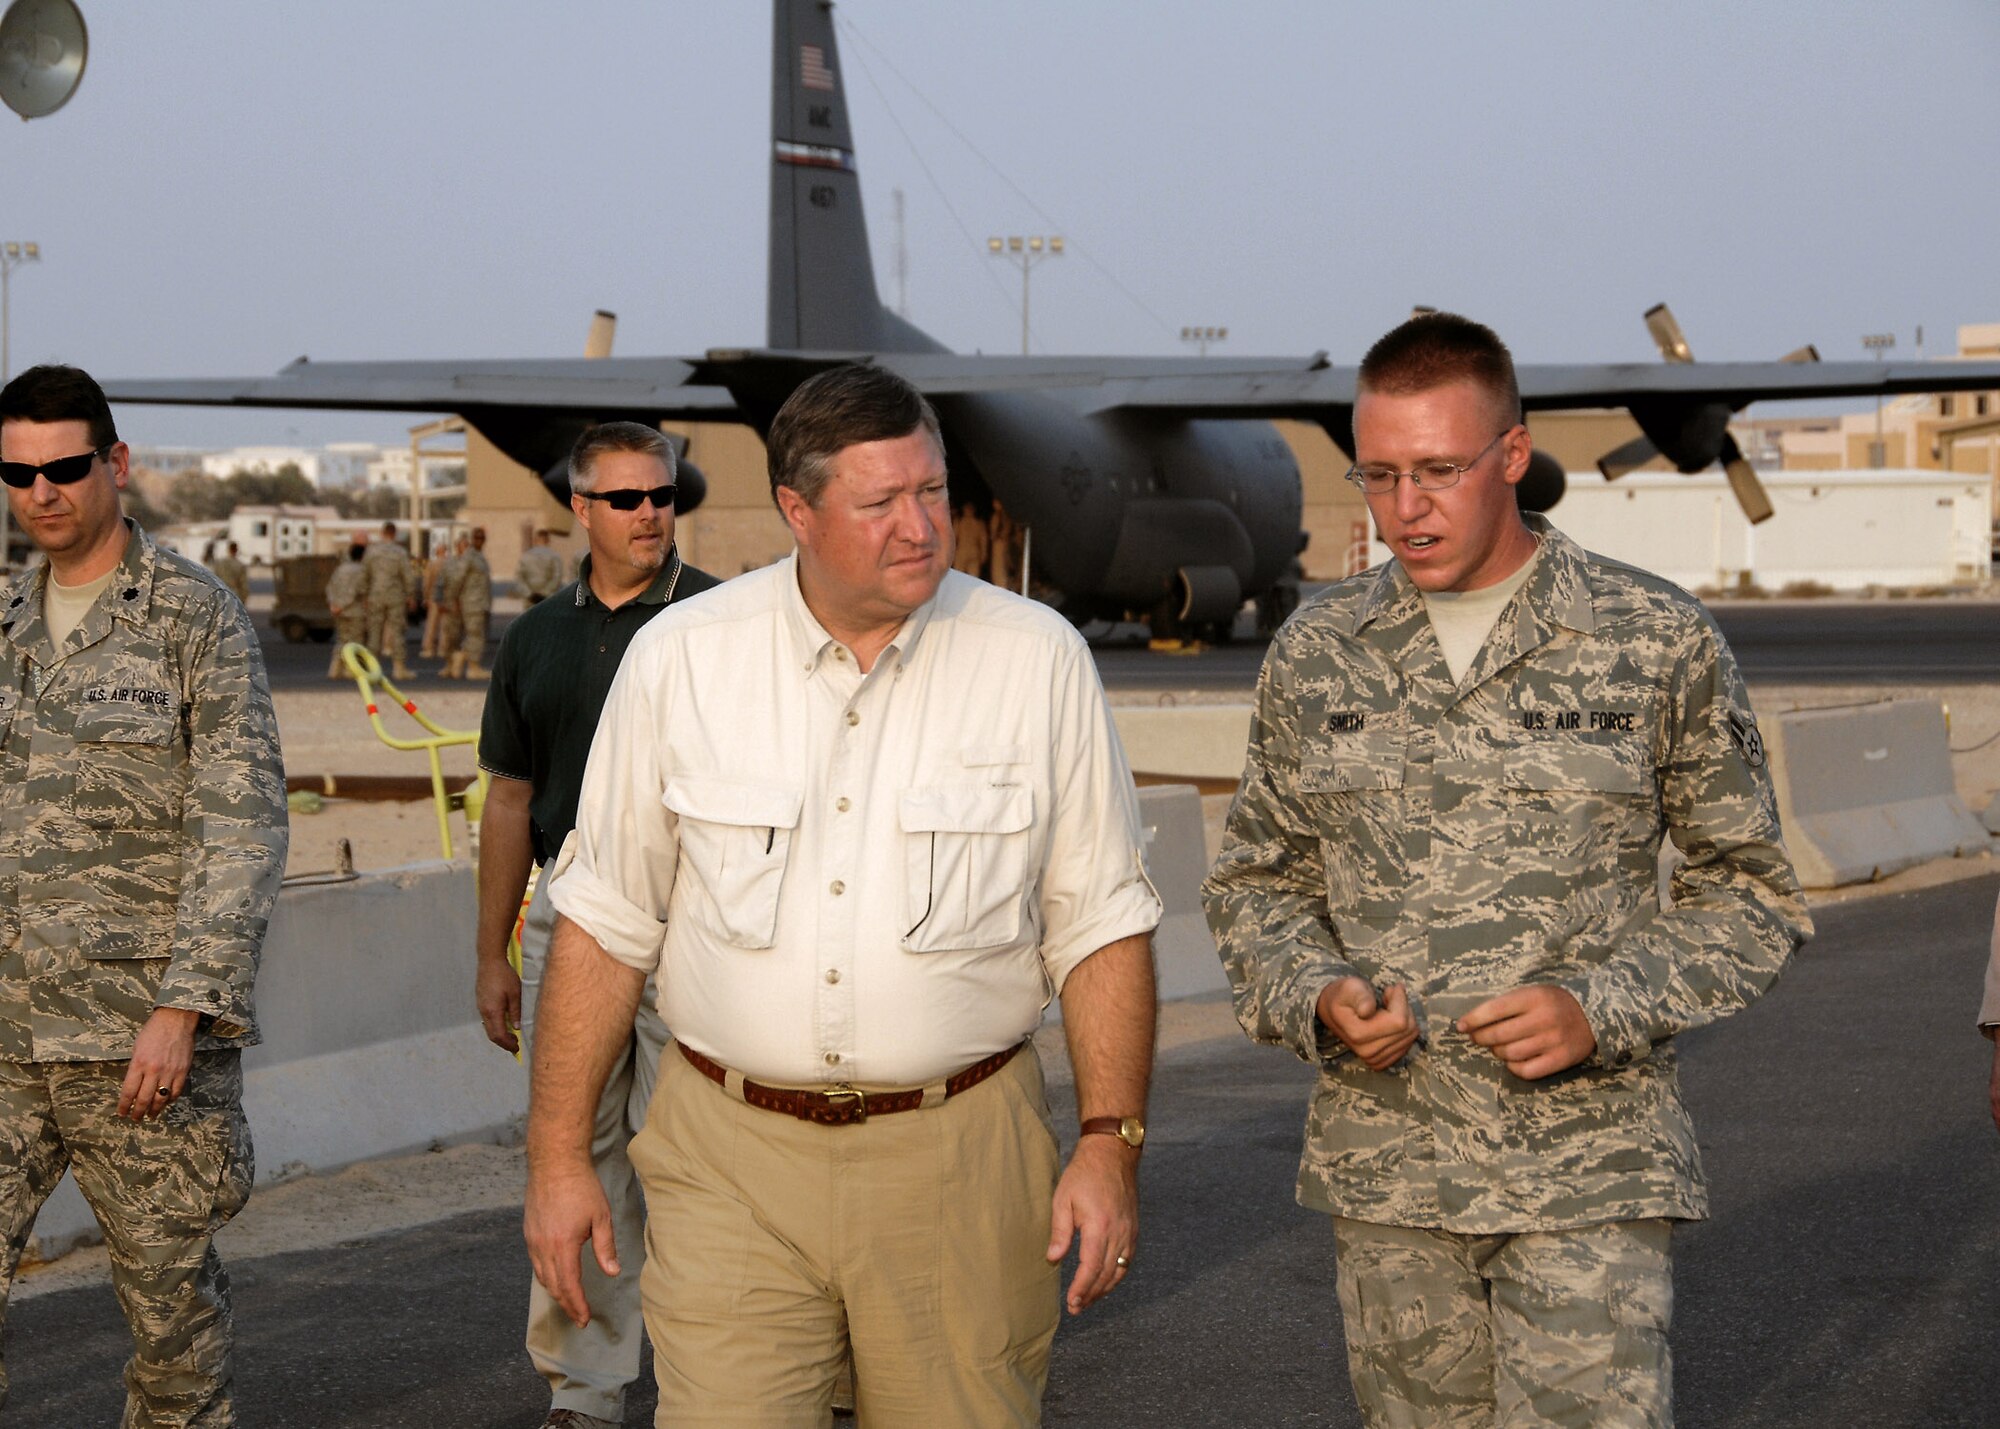 Airman 1st Class Paul Smith briefs Secretary of the Air Force Michael B. Donley on the flightline fuels storage area Oct. 14 at an air base in Southwest Asia. Secretary Donley visited with Airmen from the 386th Air Expeditionary Wing, coalition partners and sister services during his visit. Airman Smith is a 386th Expeditionary Logistics Readiness Squadron fuels technician. (U.S. Air Force photo/Tech. Sgt. Raheem Moore)